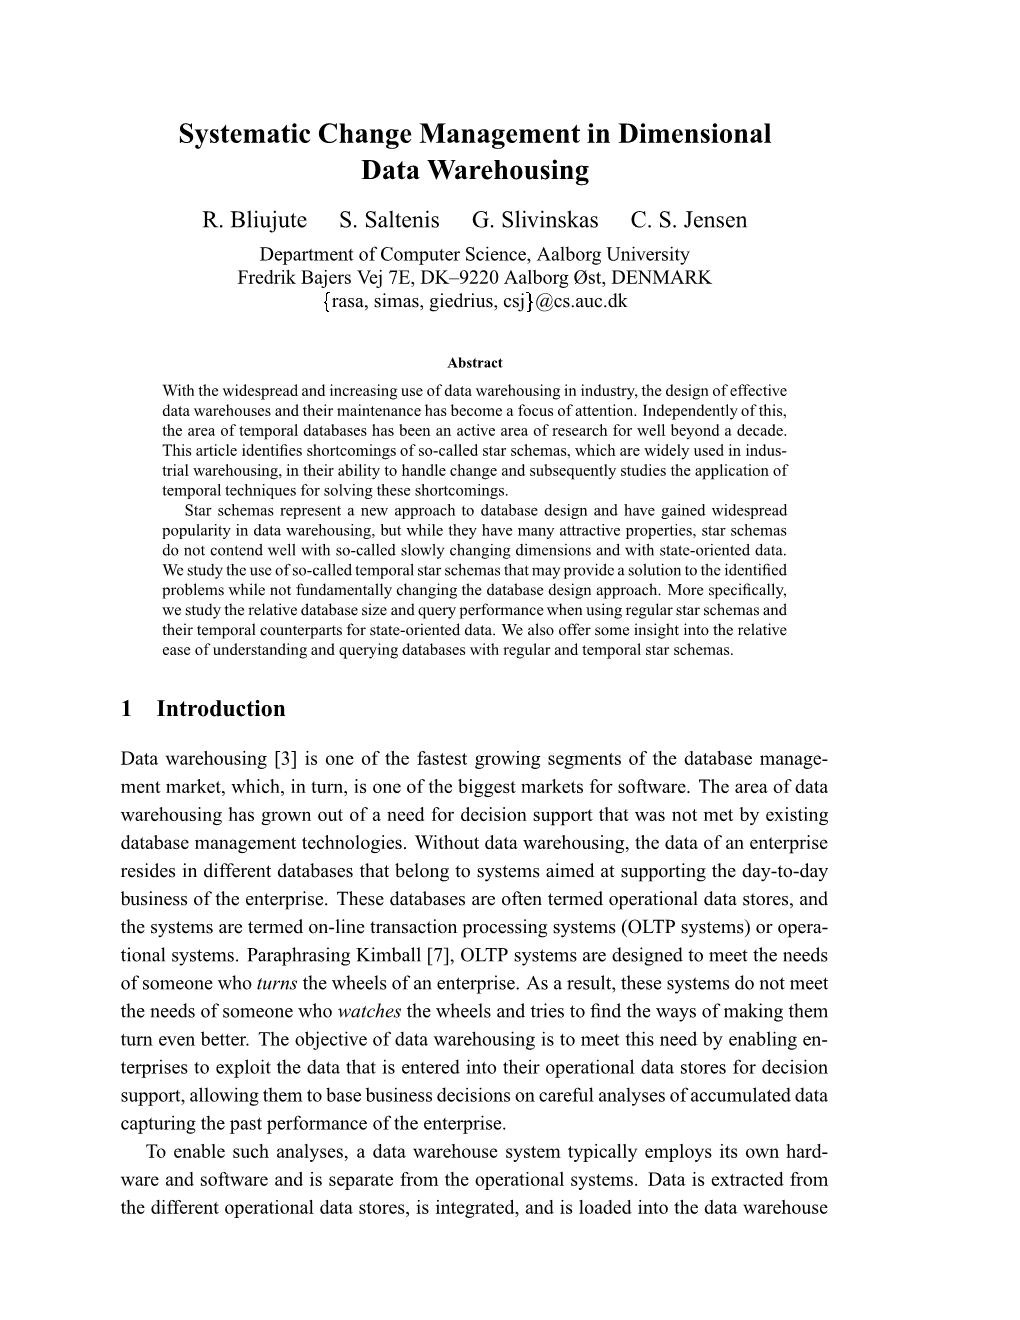 Systematic Change Management in Dimensional Data Warehousing R